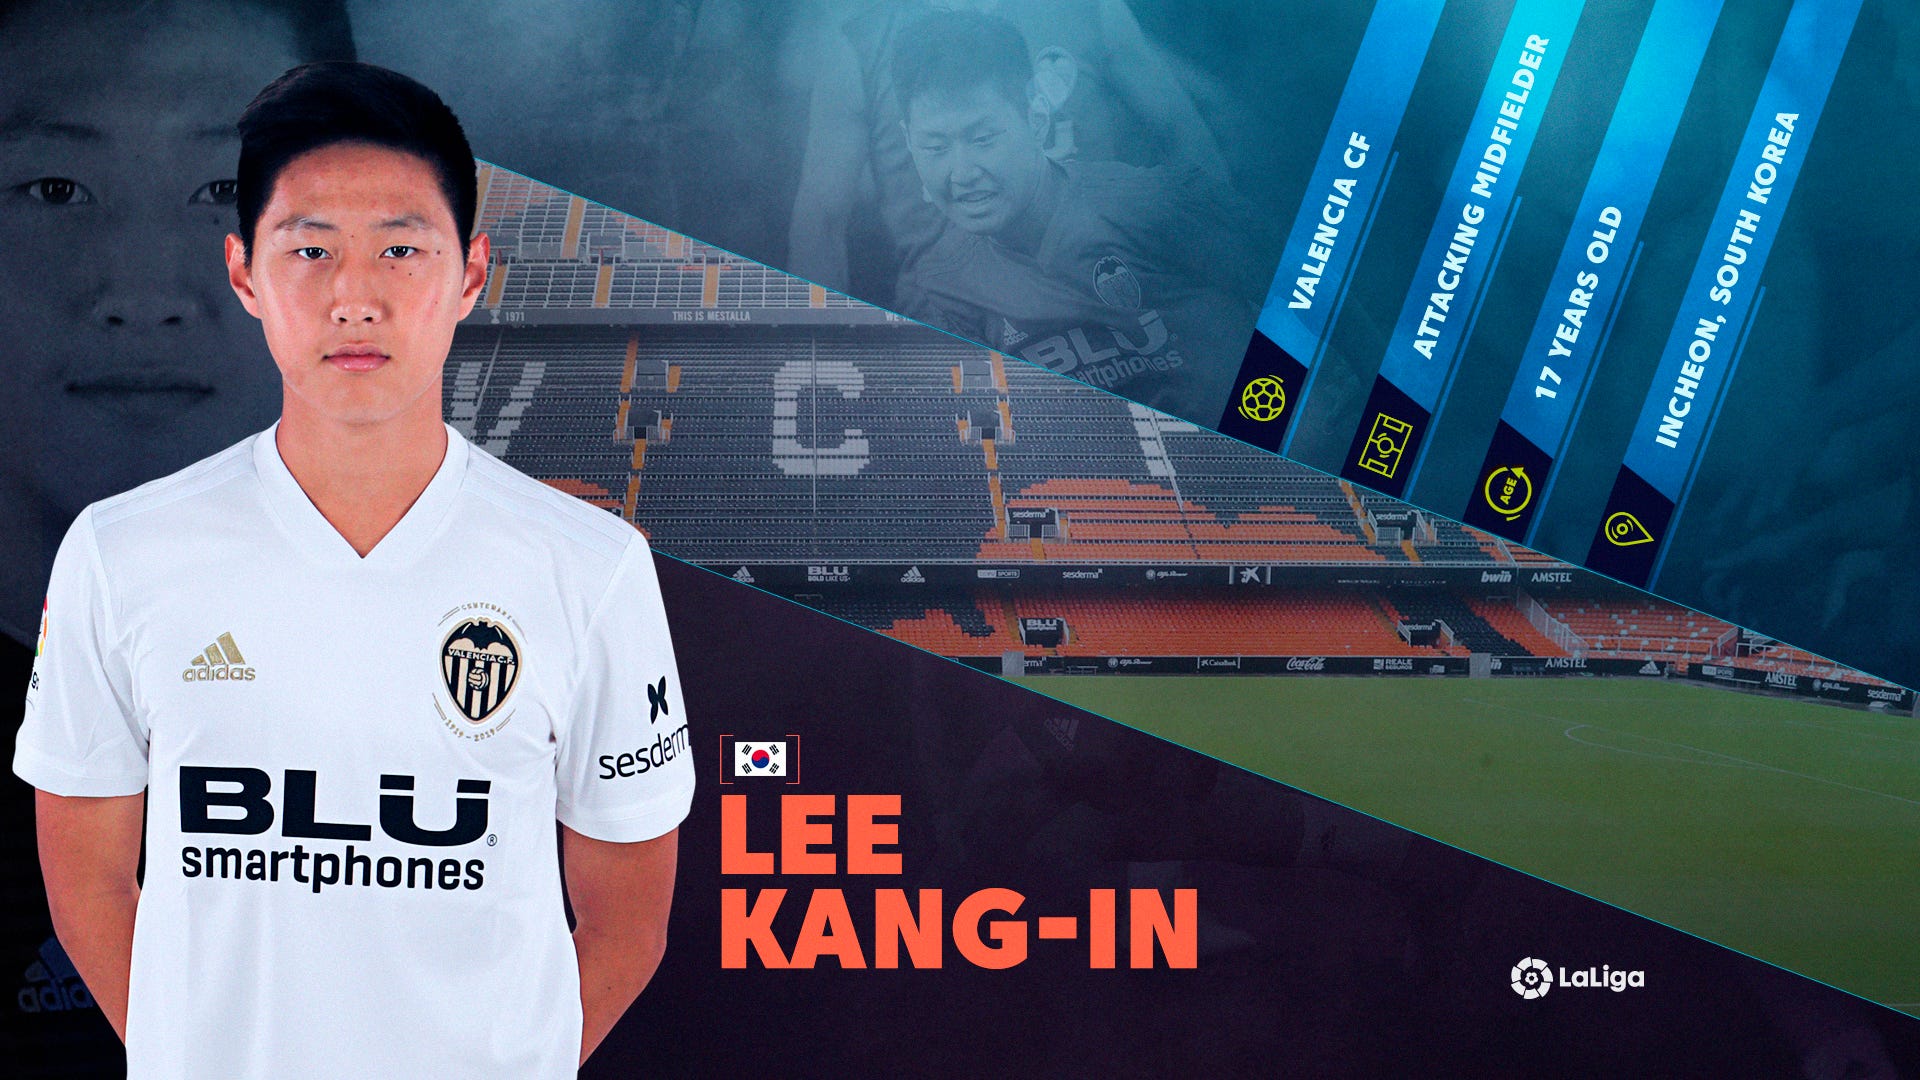 Lee Kang-in Infographic from La Liga